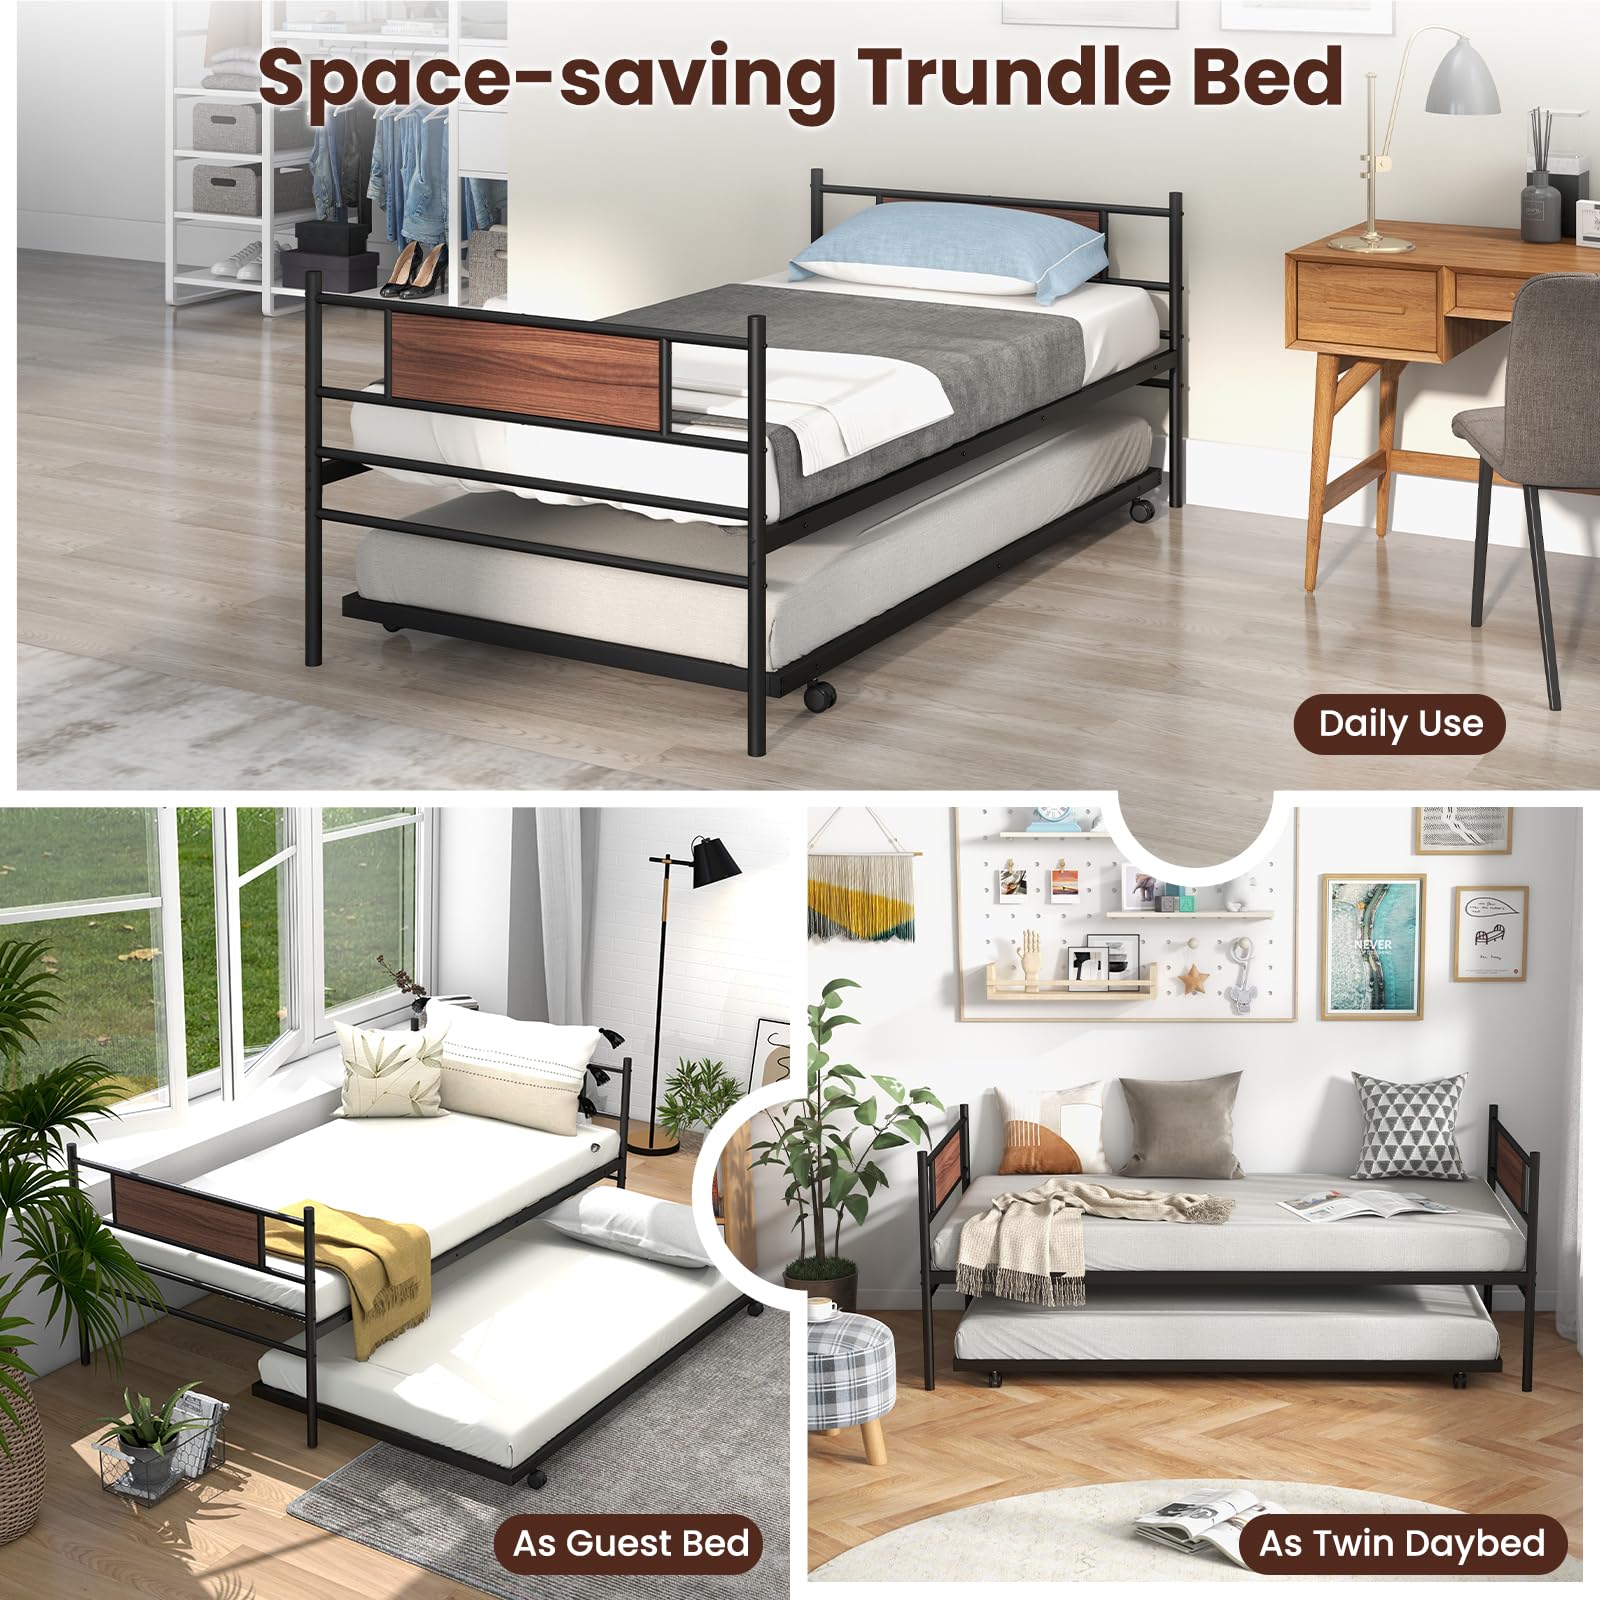 Giantex Metal Daybed with Trundle, Twin Size Day Bed with Wood Grain Headboard & Metal Slat Support